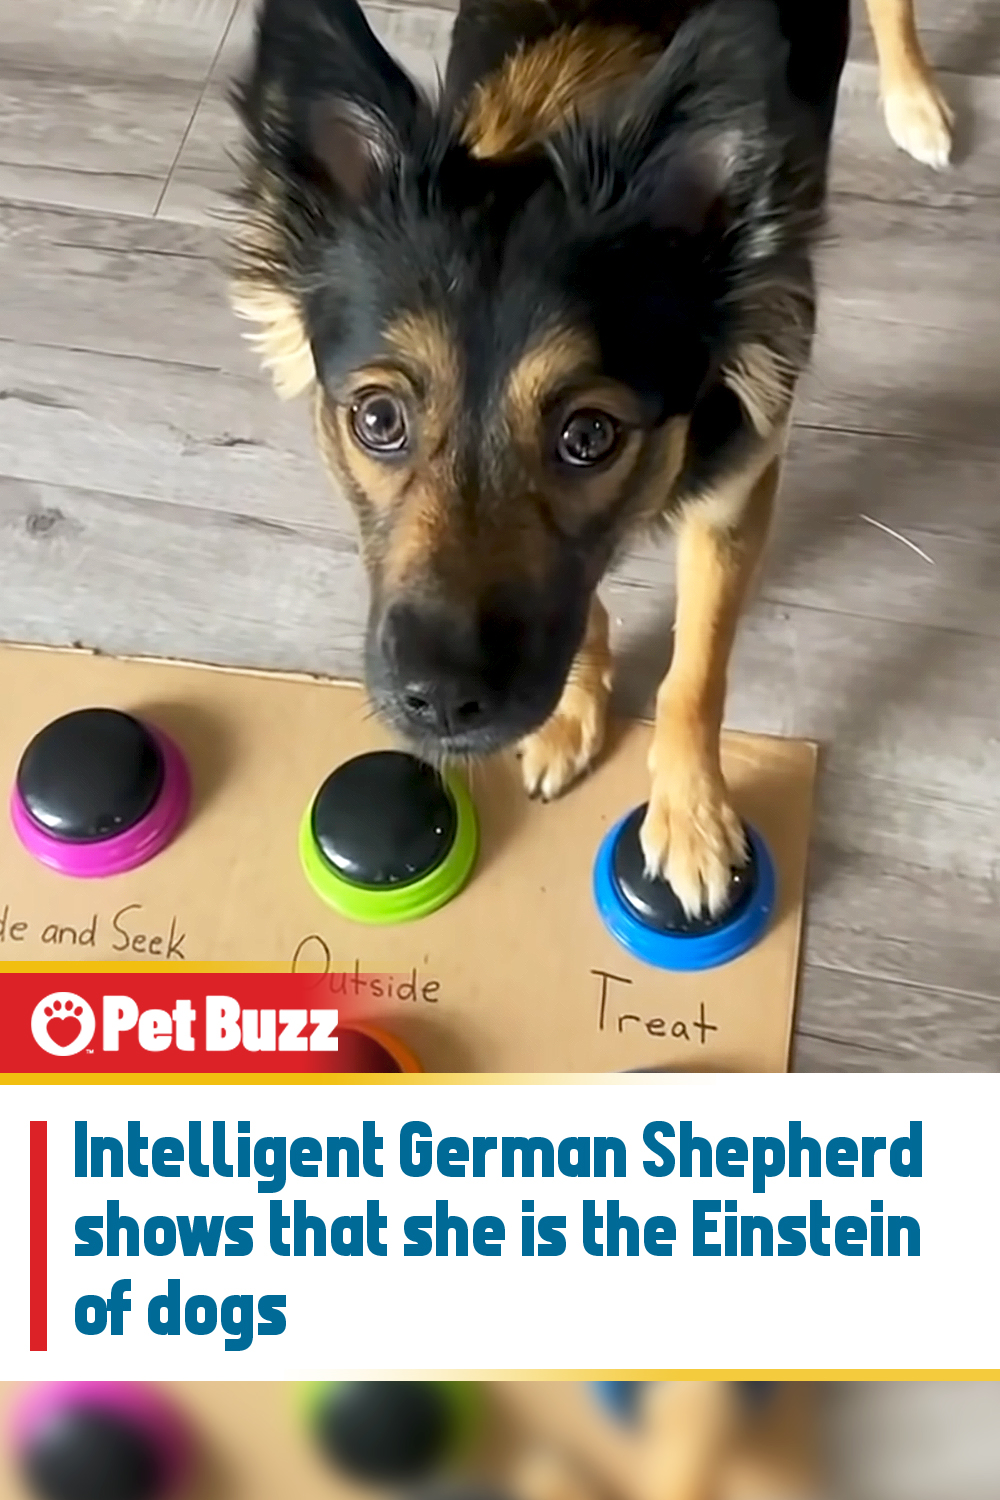 Intelligent pup shows that she is the Einstein of dogs